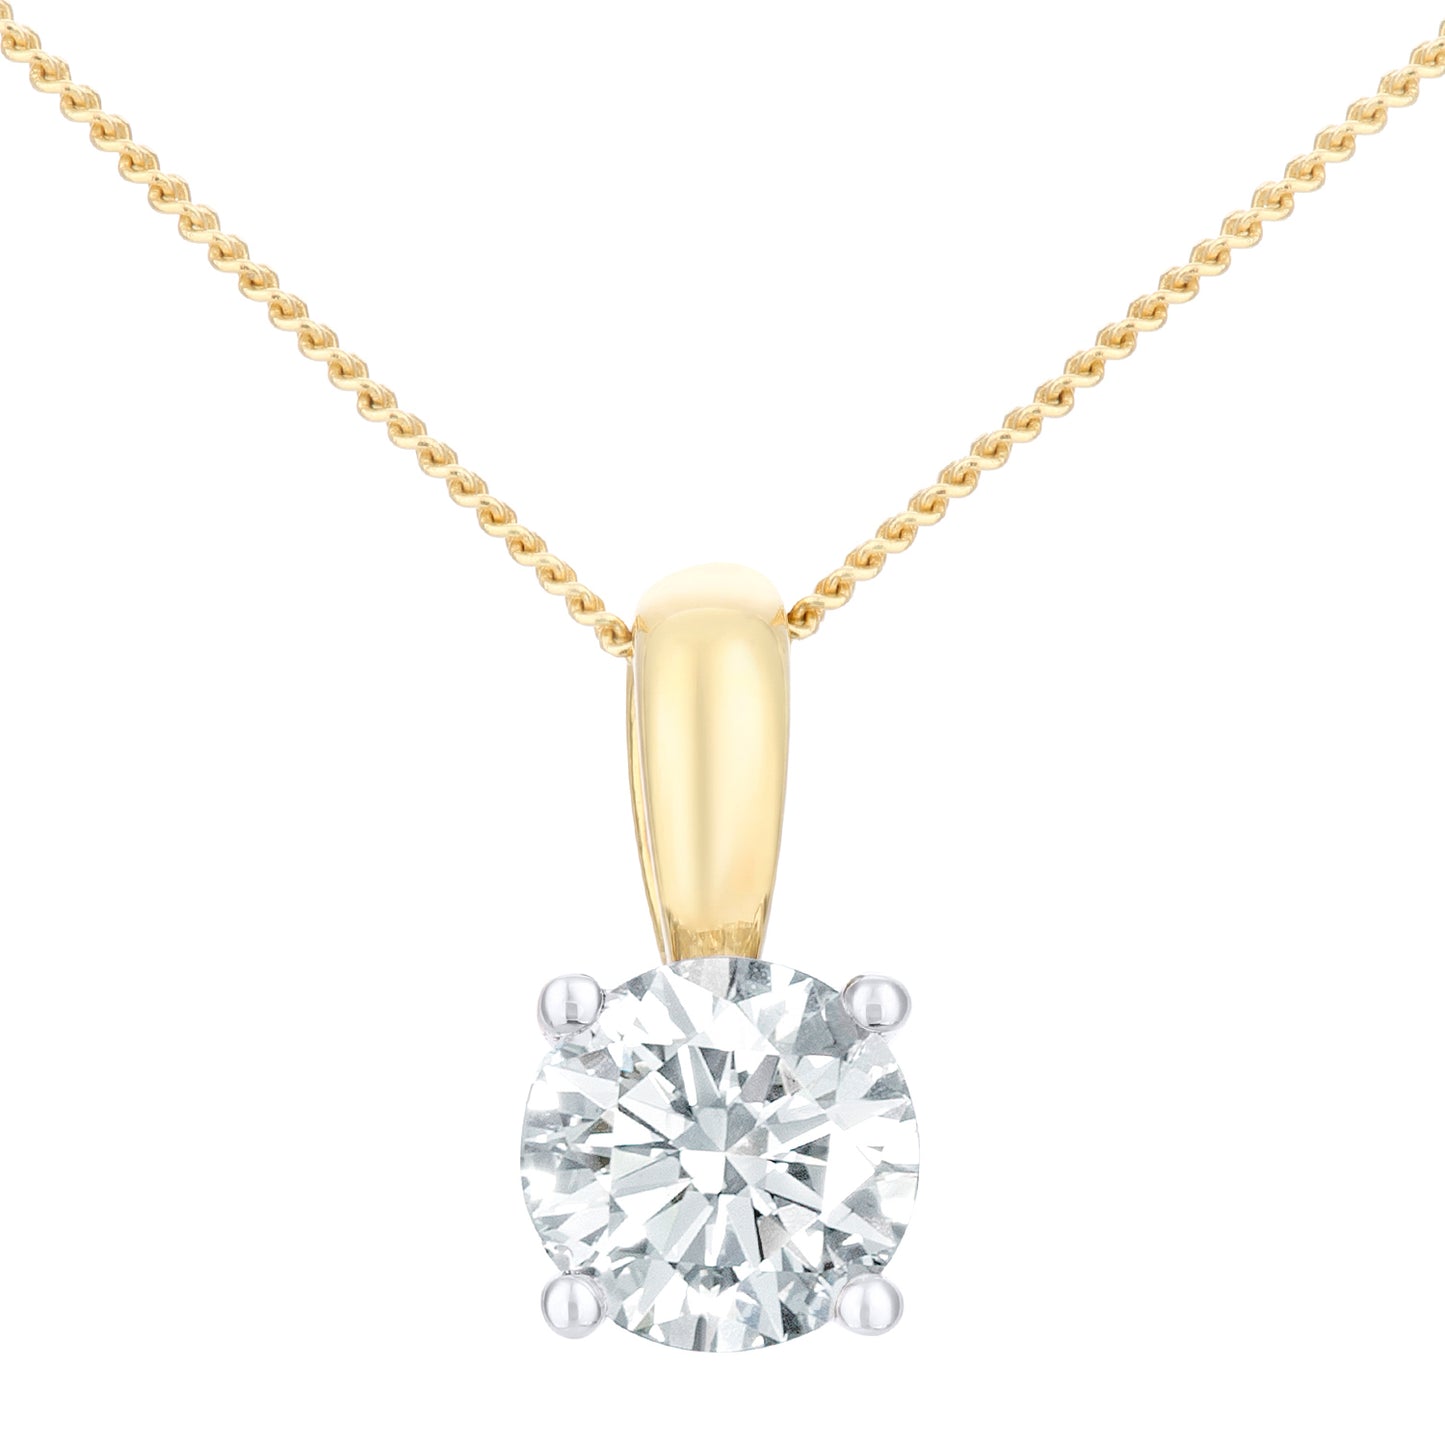 18ct Gold  Round 1ct Diamond Solitaire Pendant Necklace 18 inch - PP0AXL1892Y18HSI